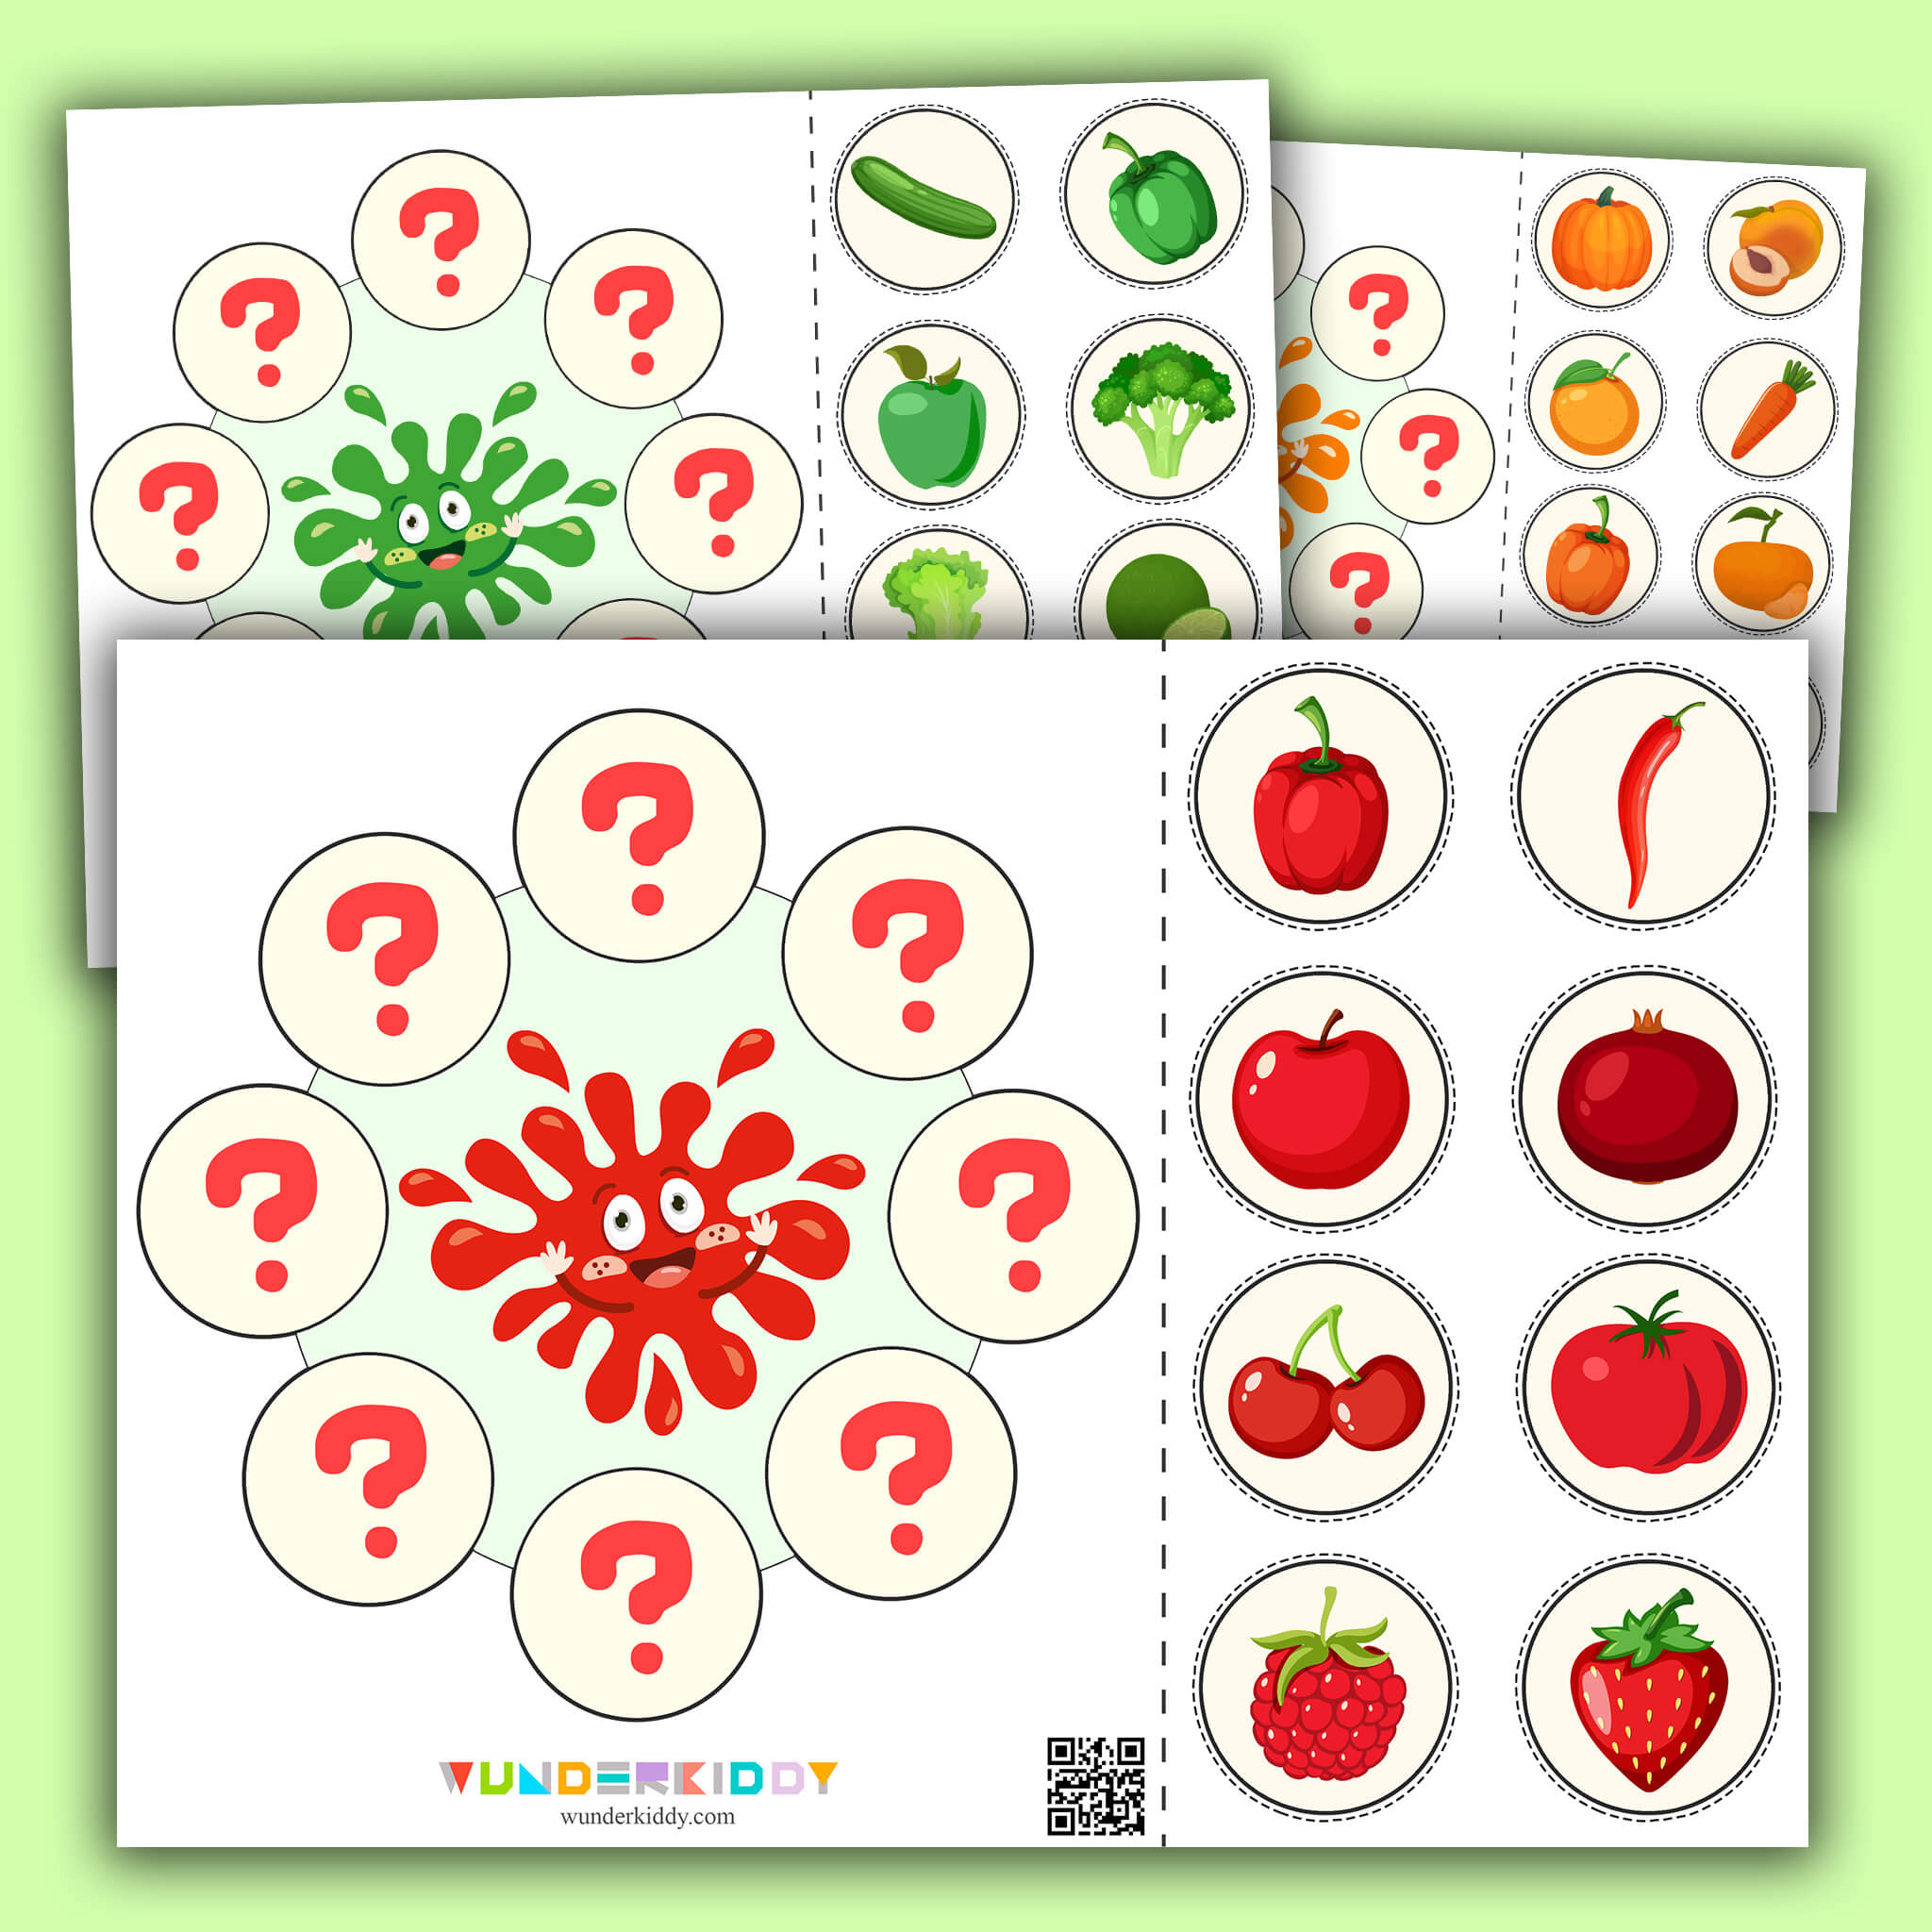 Sorting Activity Sheet Fruits and Vegetables